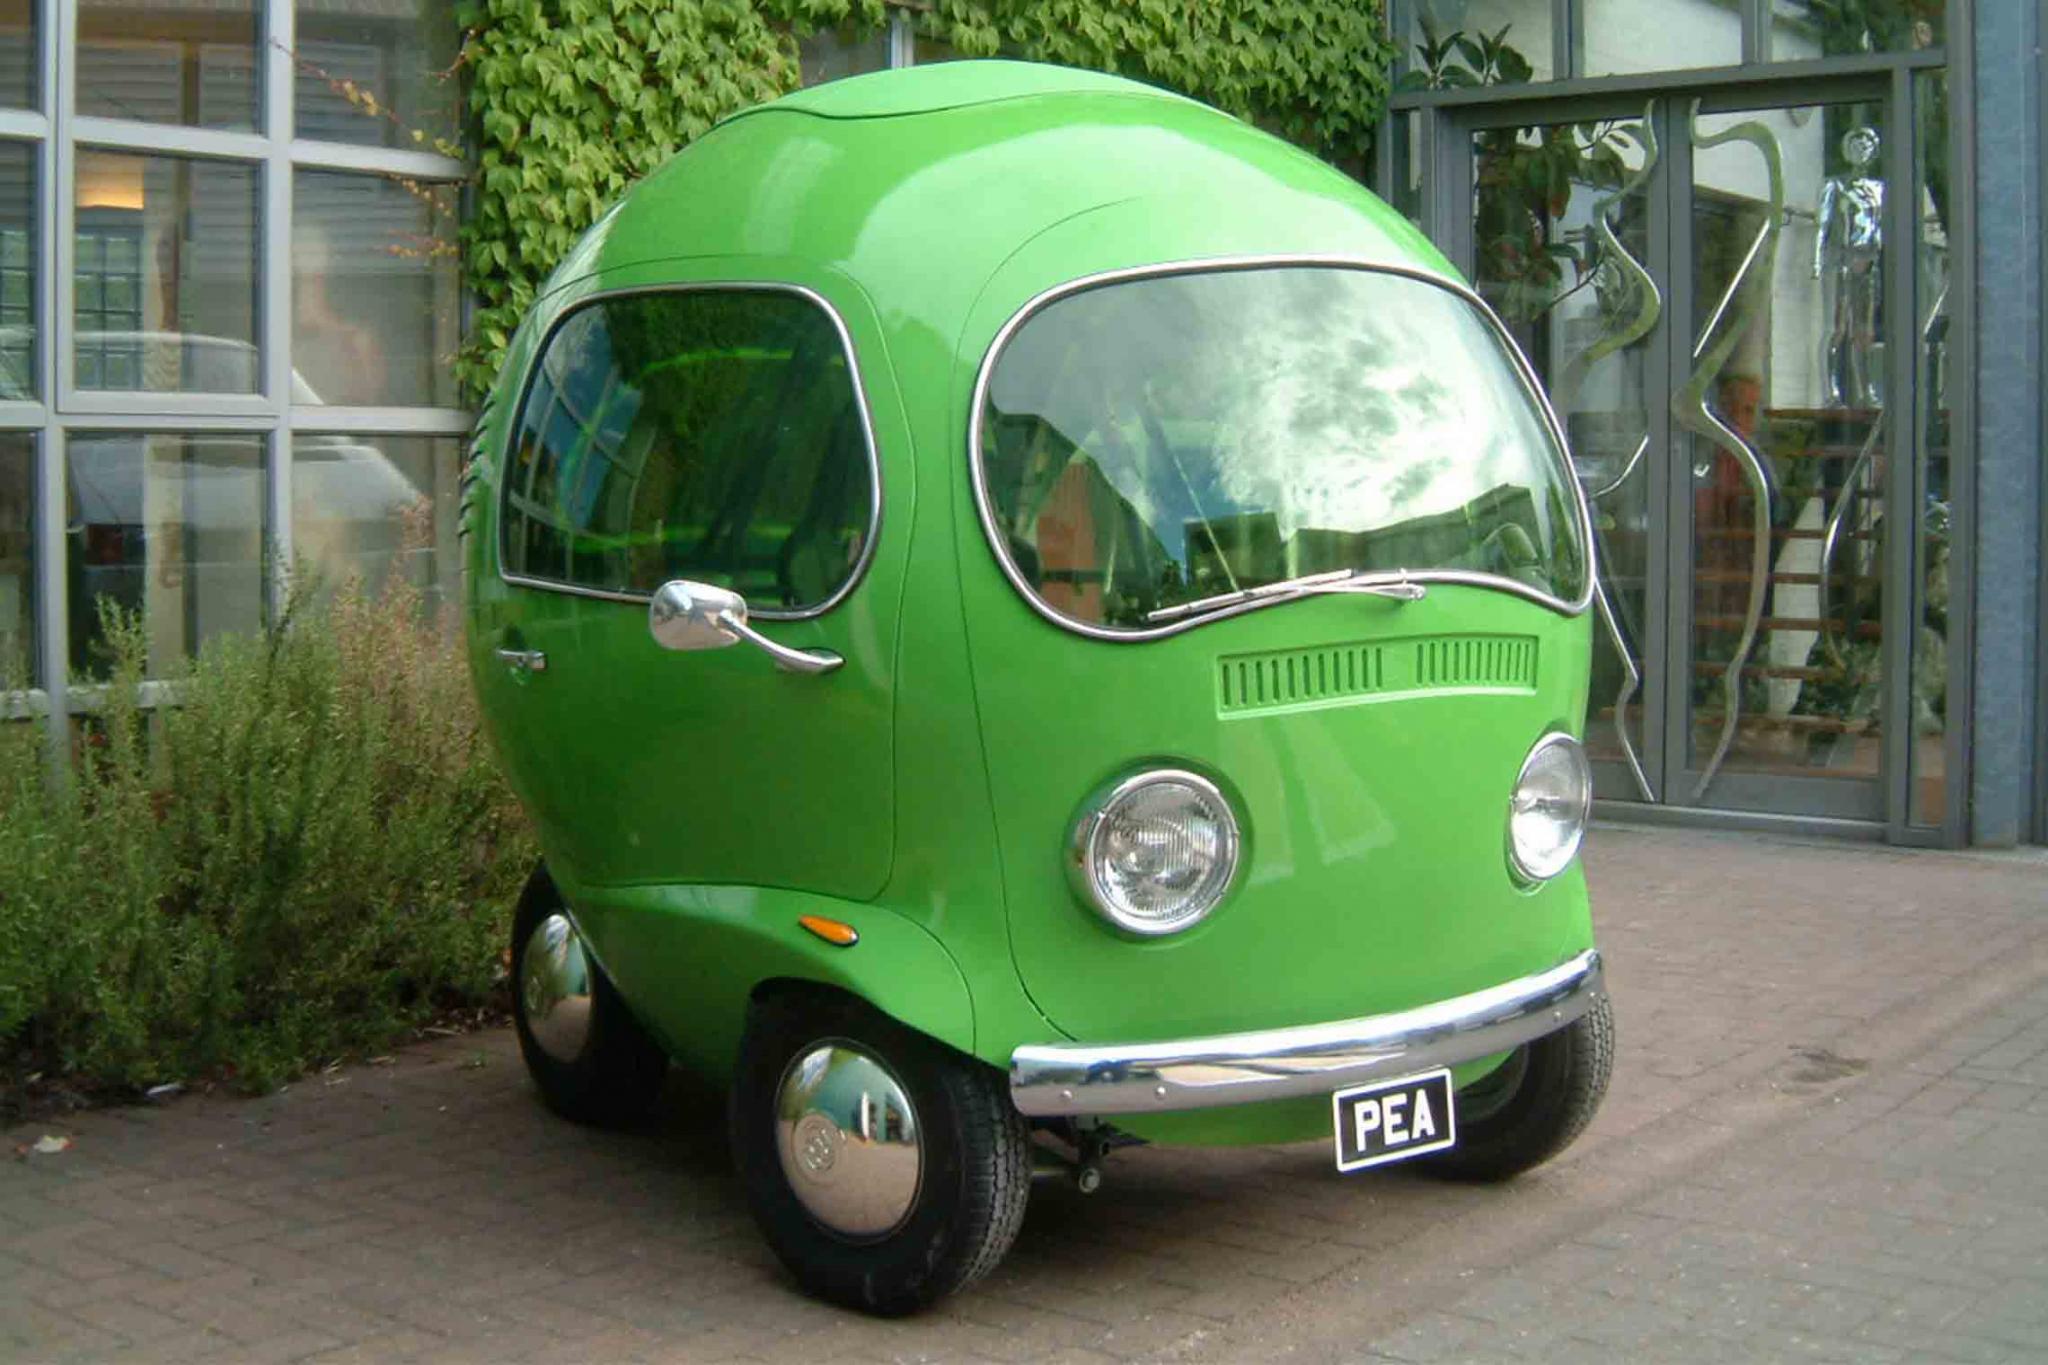 I'm not quite sure where to put this...-pea-car-face03-jpg